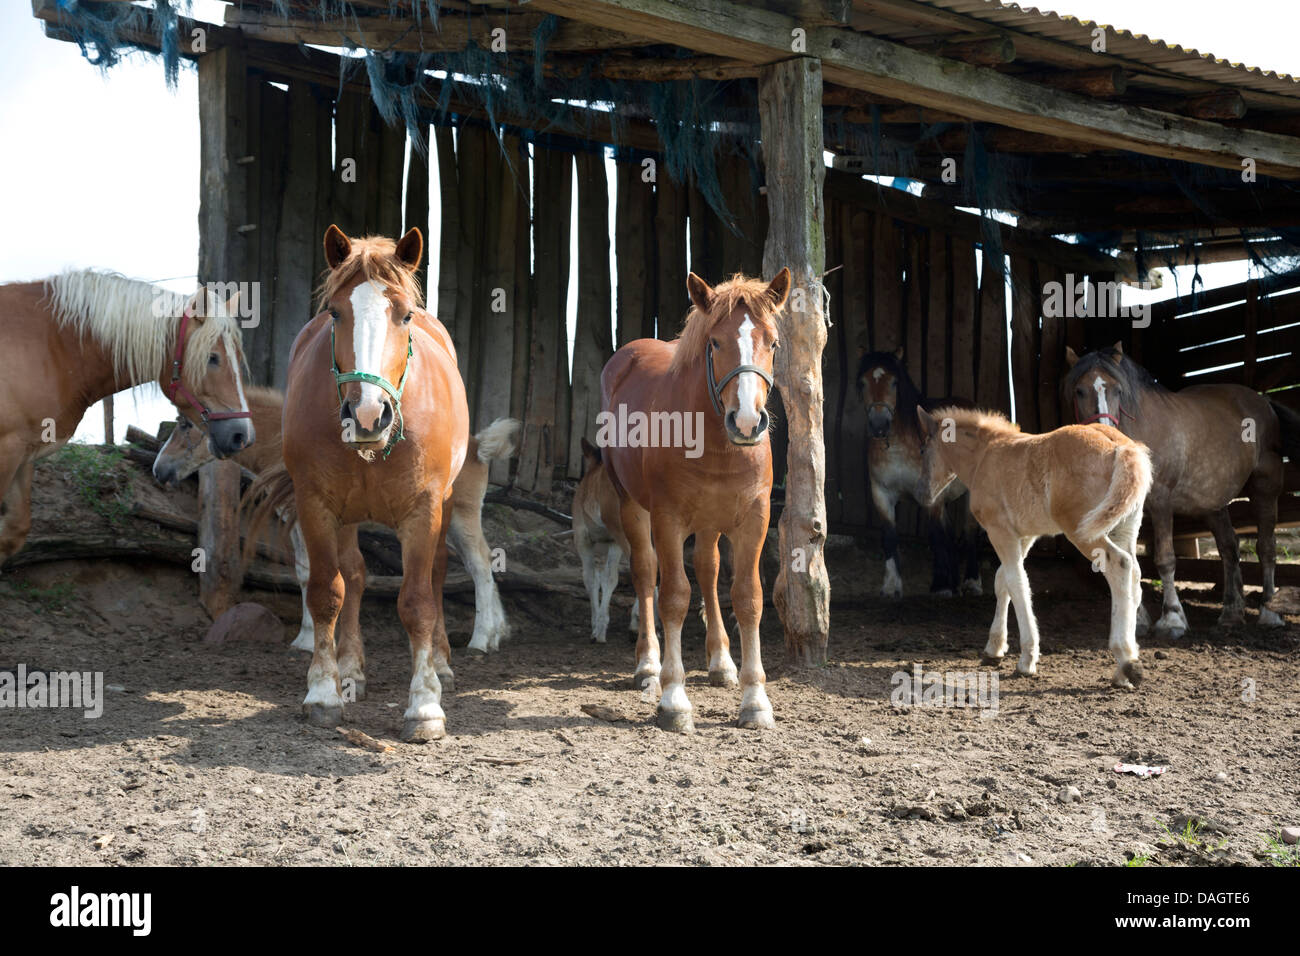 Horses in a shed Stock Photo